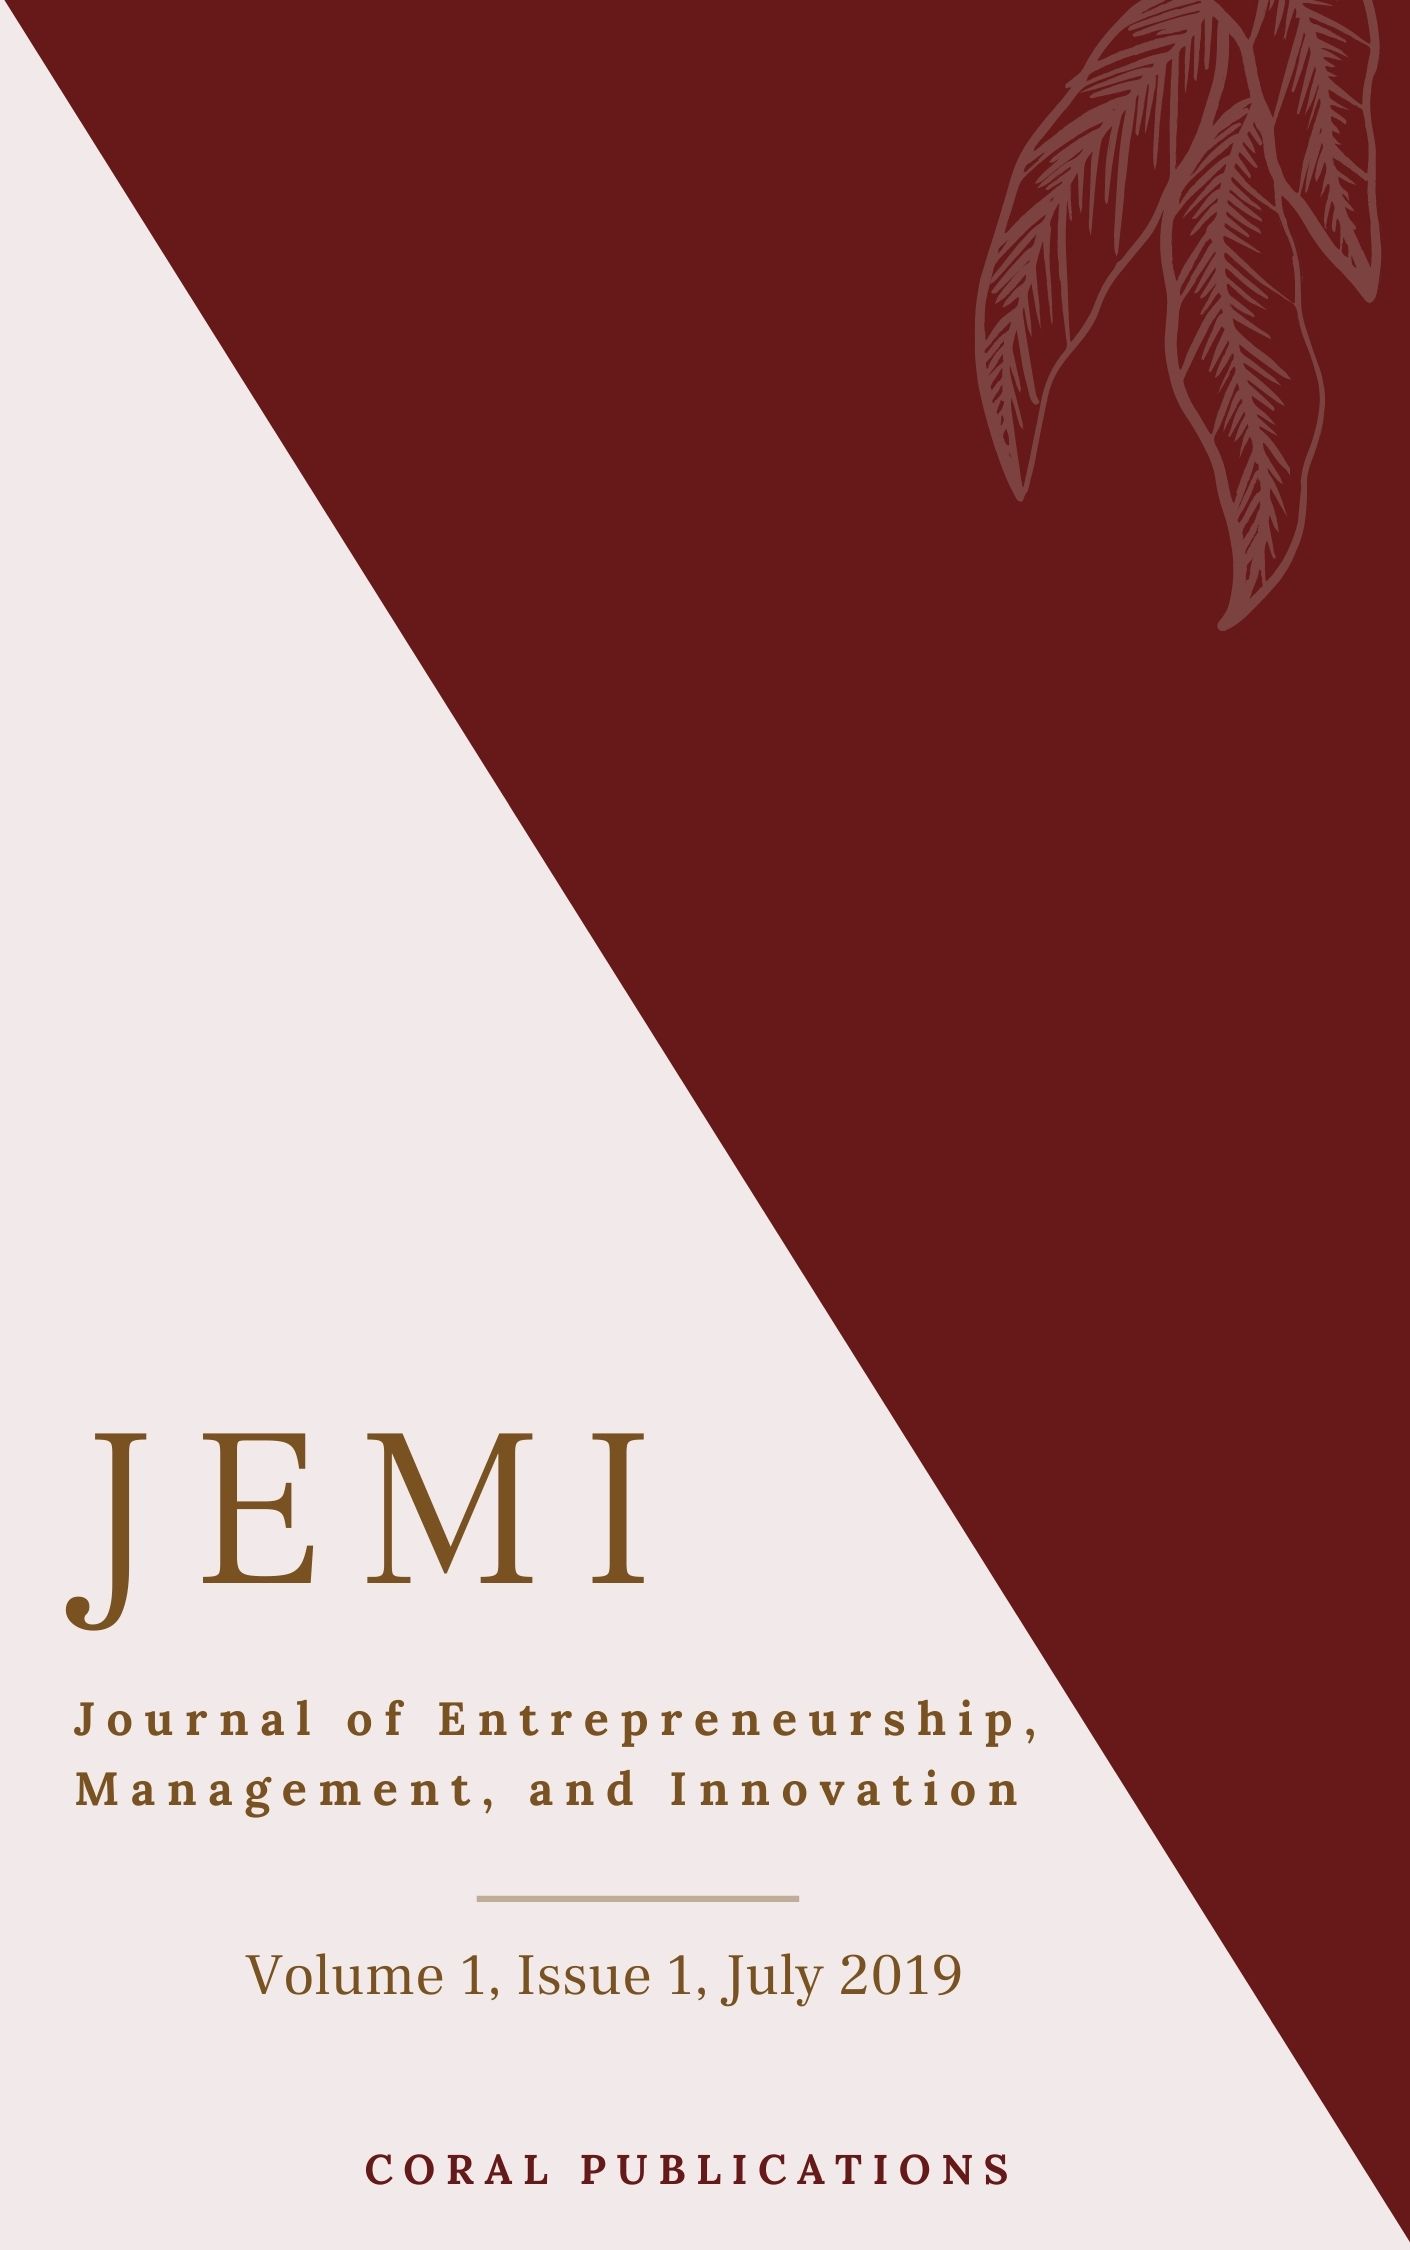 					View Vol. 1 No. 1 (2019): Journal of Entrepreneurship, Management, and Innovation Volume (1) Issue (1) July 2019
				